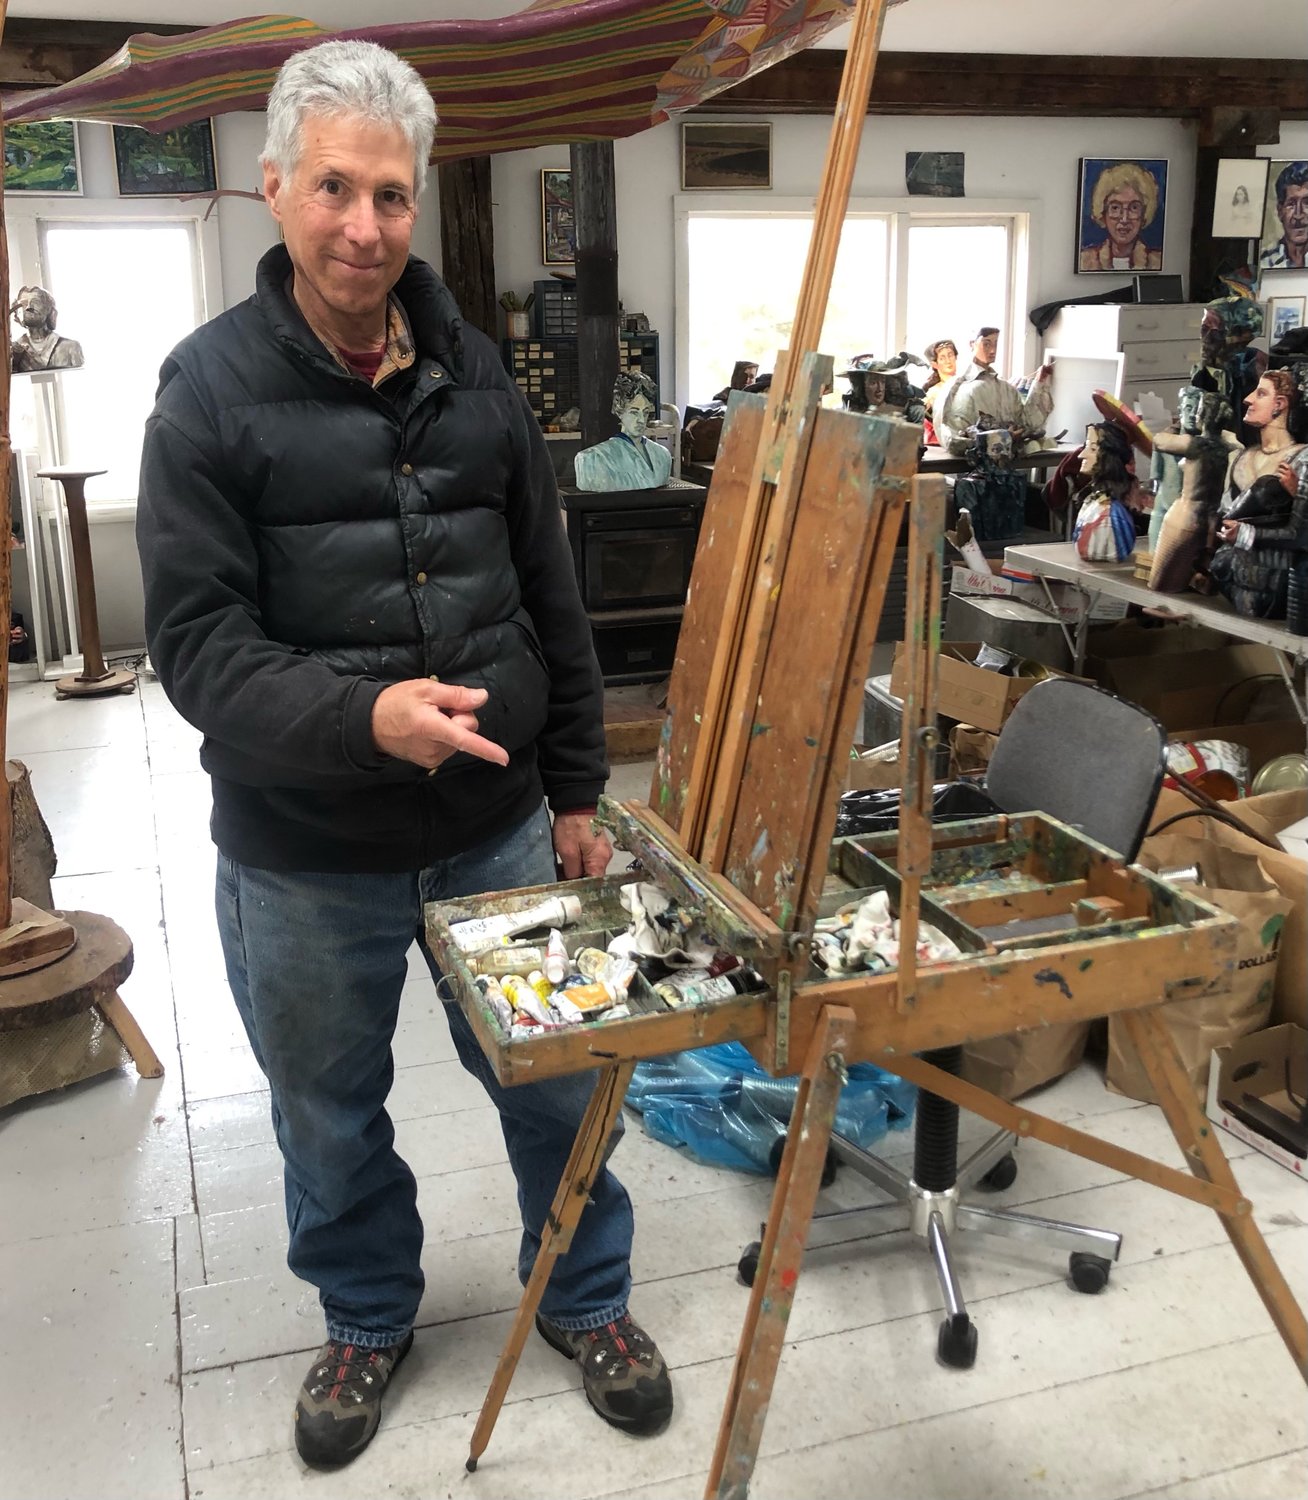 Visual artist Allan Rubin instructing Fox on the complicated fine art of opening and closing the real-dear artsy-fartsy plein air easel that will showcase one of Fox's pieces in the exhibit.